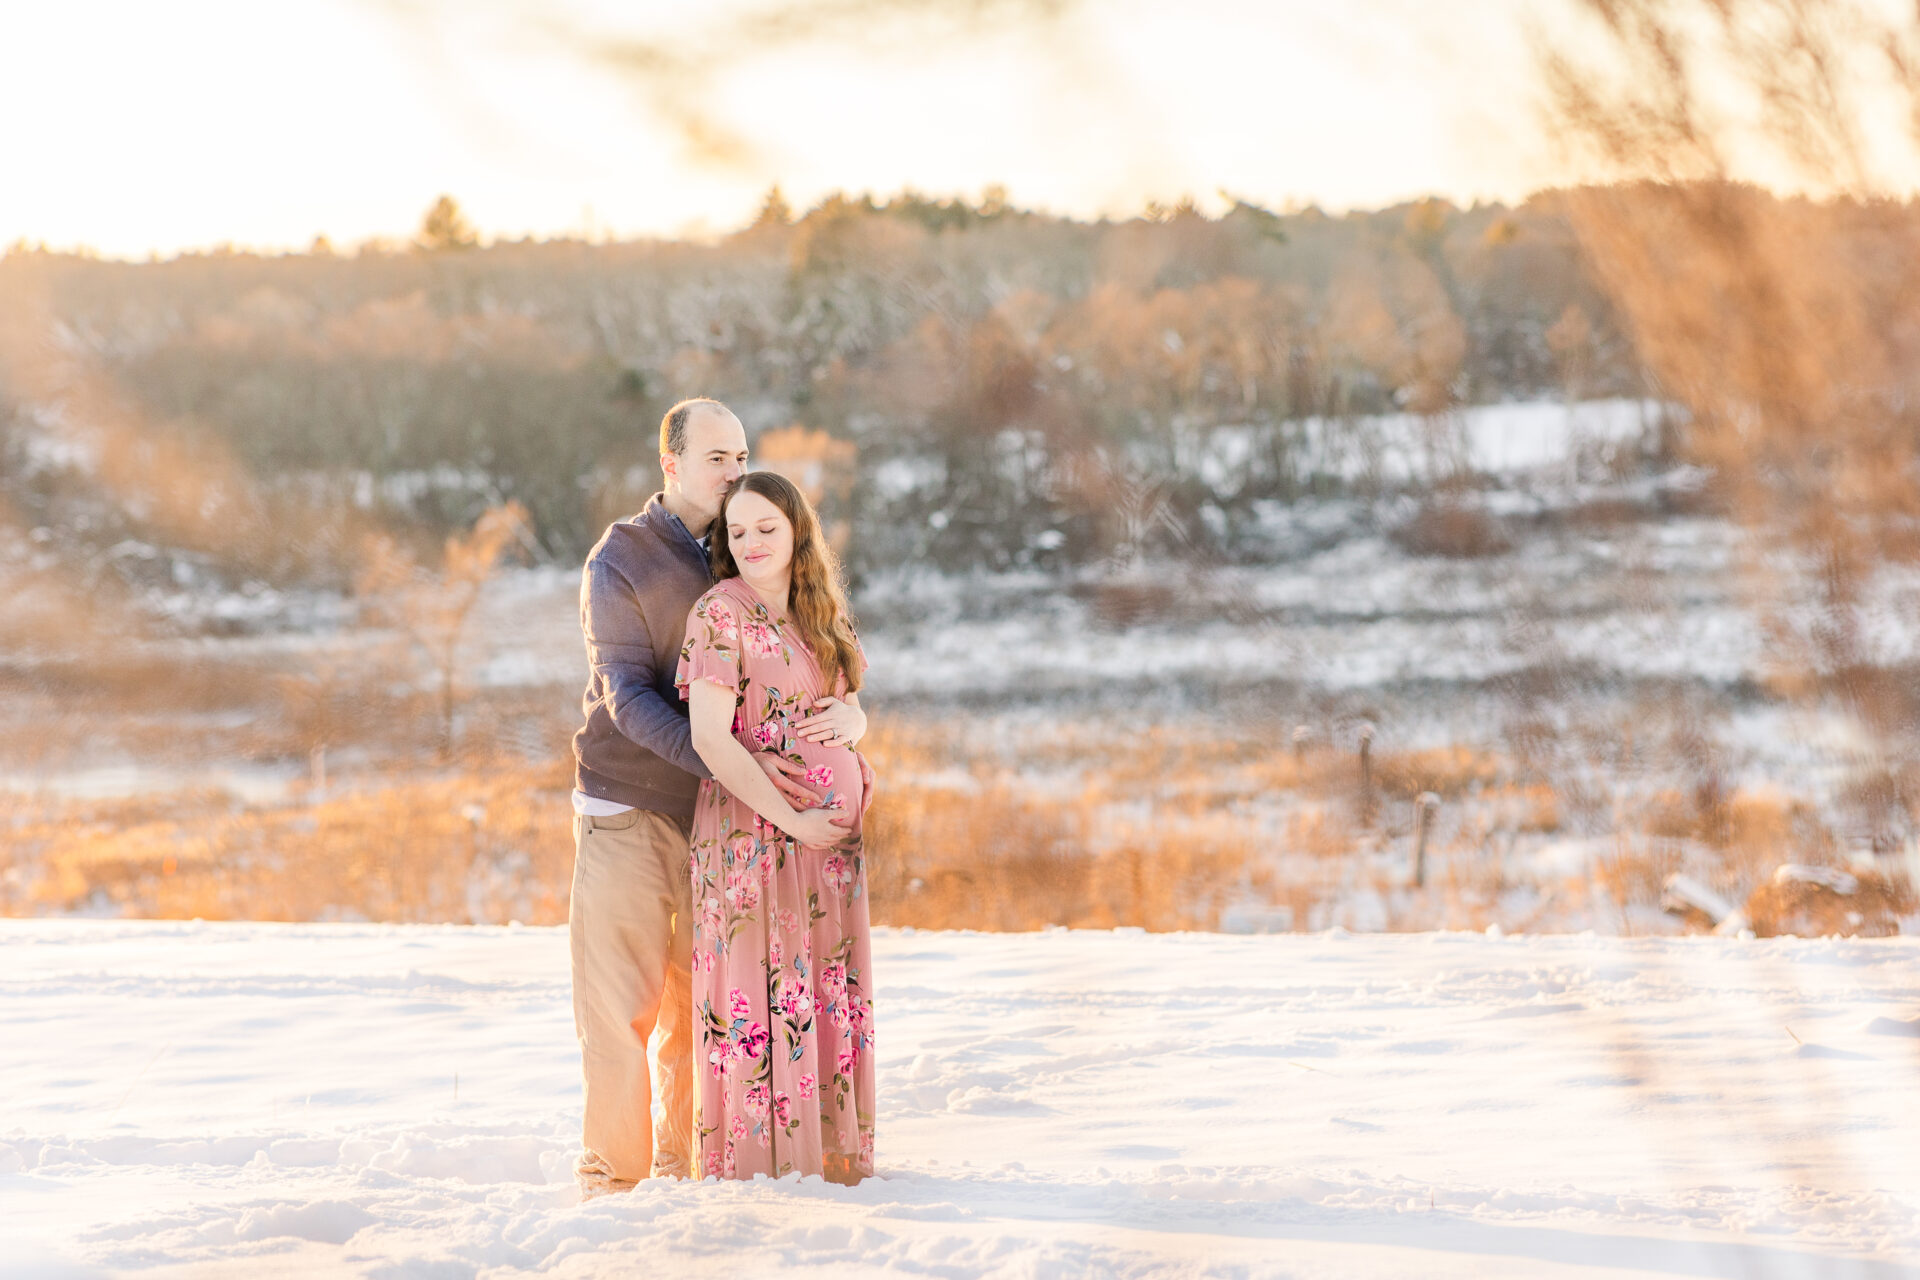 Seasonal Guide for Maternity Photos| snowy winter maternity session with Sara Sniderman Photography at Medfield State Hospital in Medfield Massachusetts